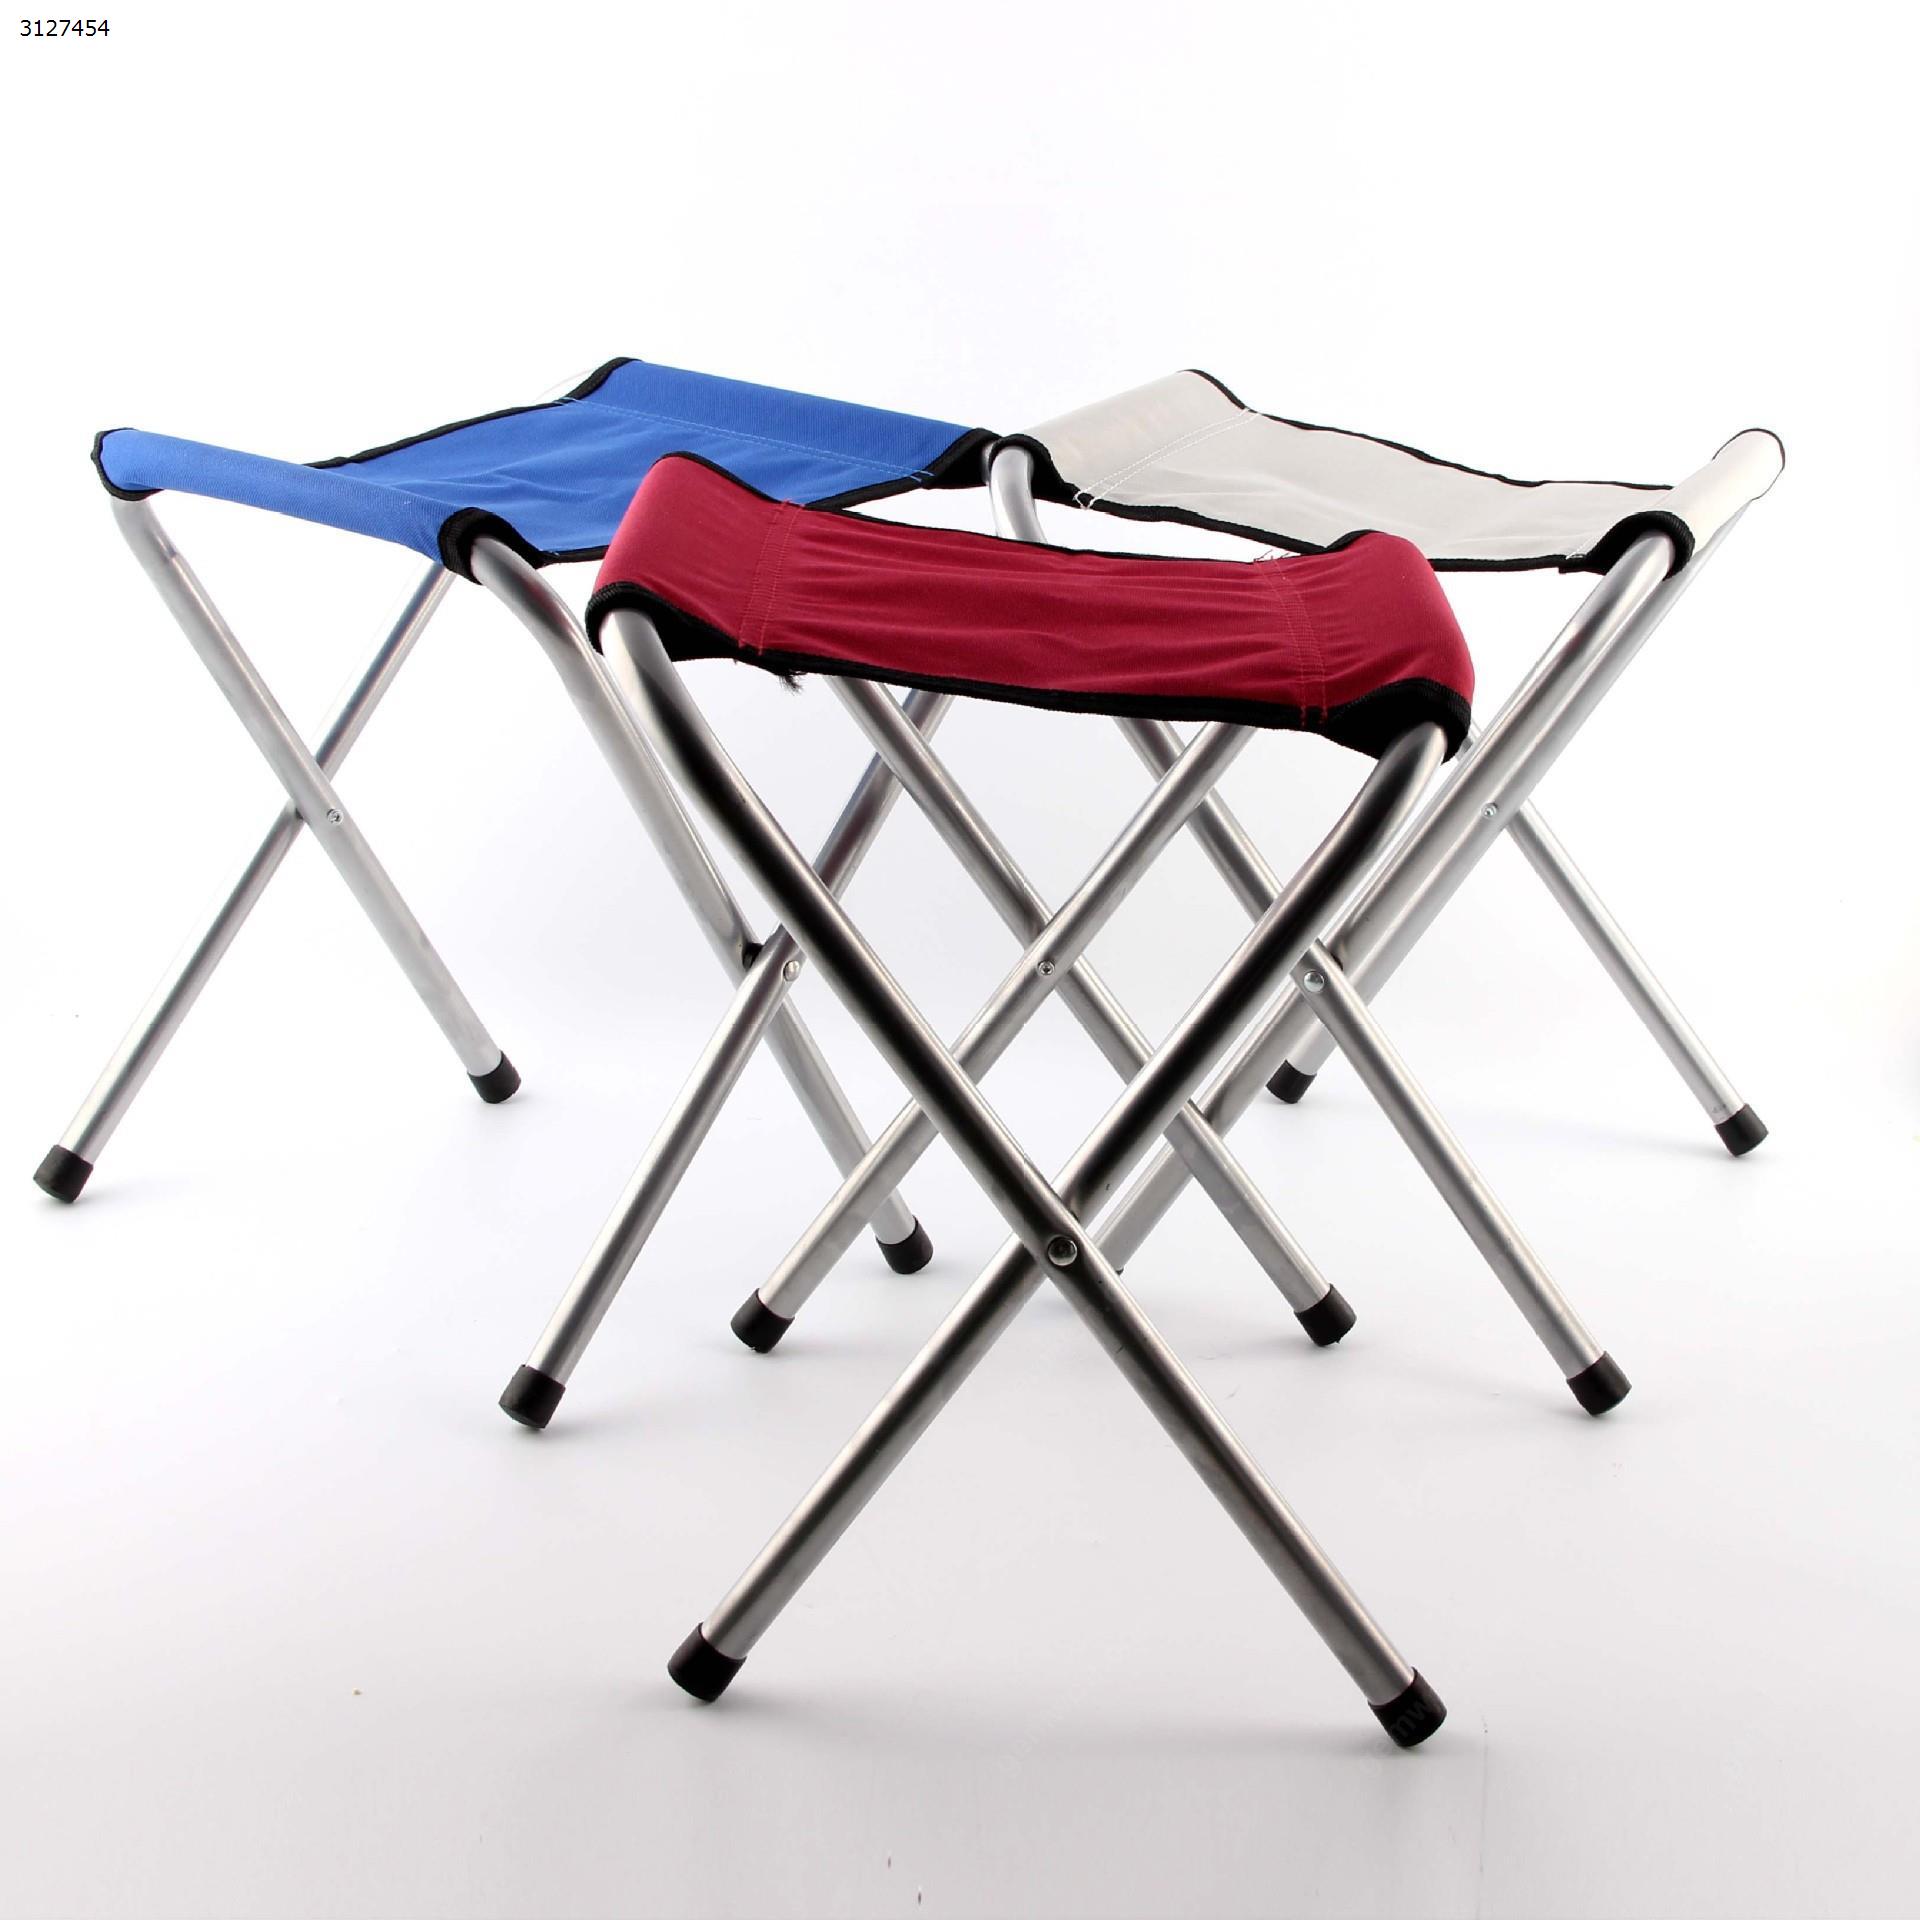 Outdoor folding chairs portable fishing chairs outdoor leisure picnic folding camp chair train a small stool blue Fishing N/A